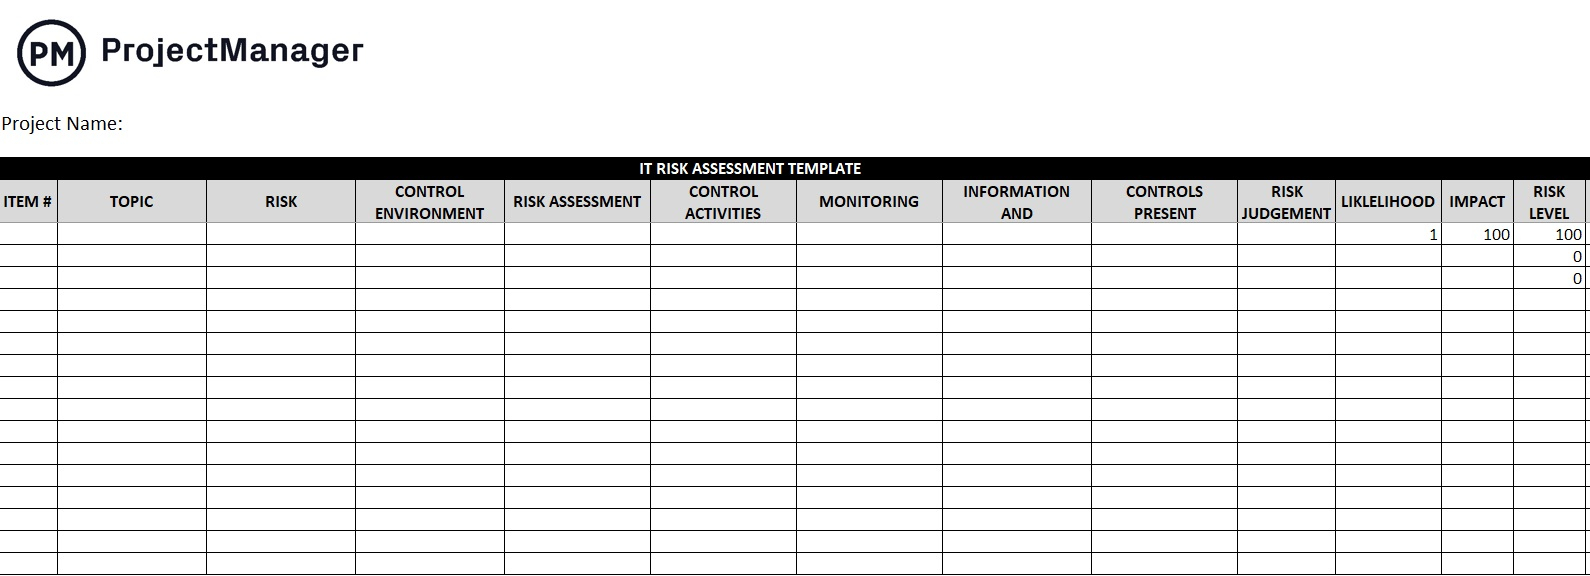 IT Risk Assessment Template - Free Excel Download - ProjectManager